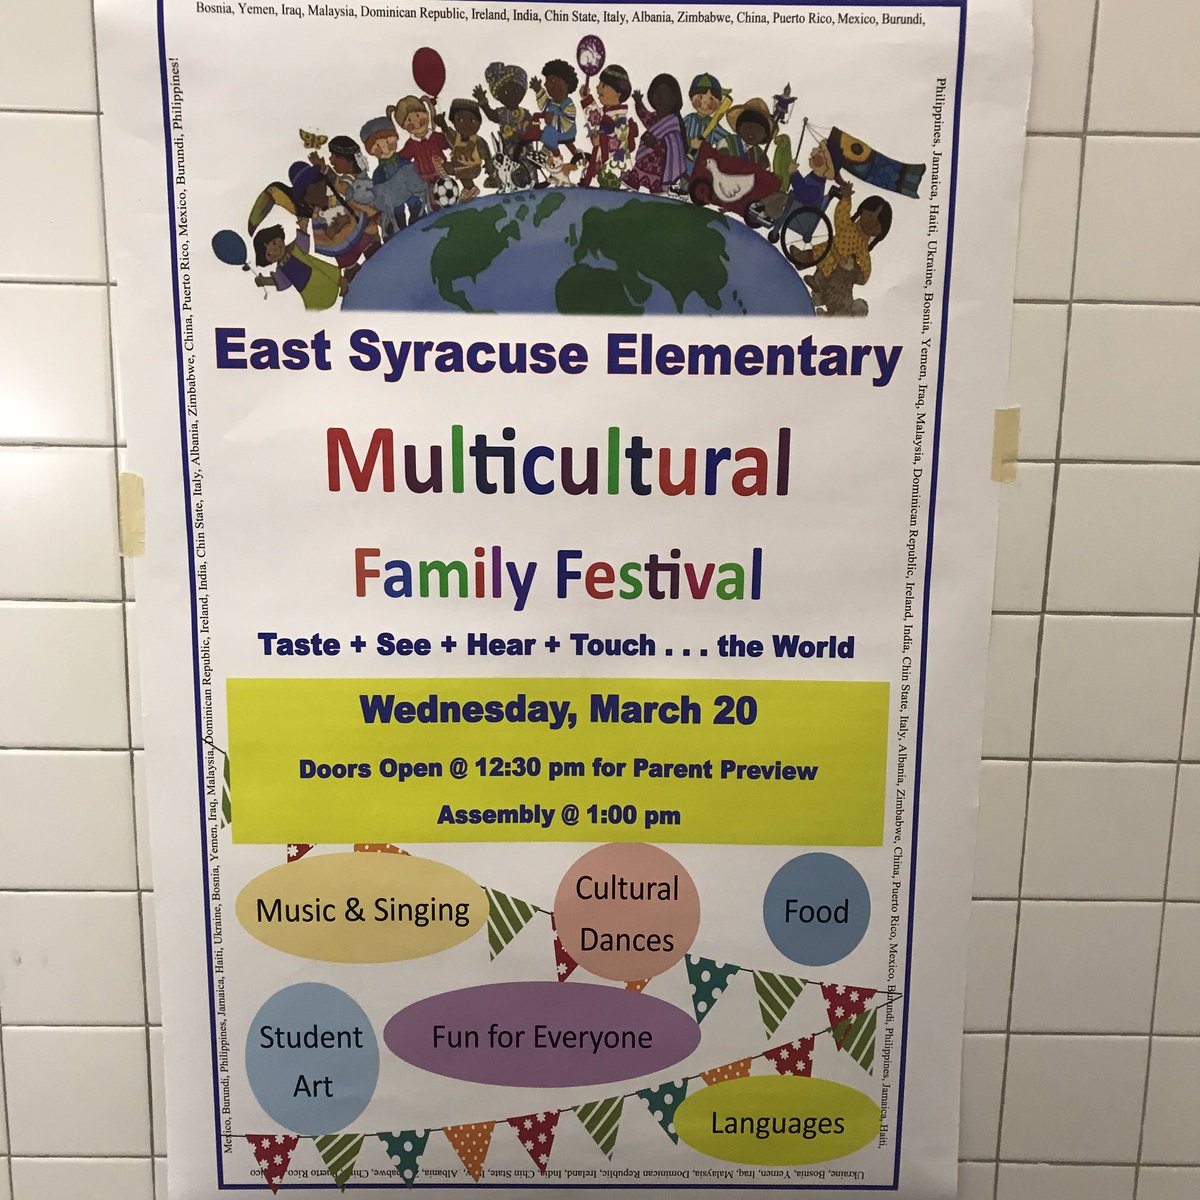 Our multicultural festival at ESE is coming up March 20th! It will be a day filled with food, dances, videos and learning about cultures! #ESErocks #enl #multiculturalfestival